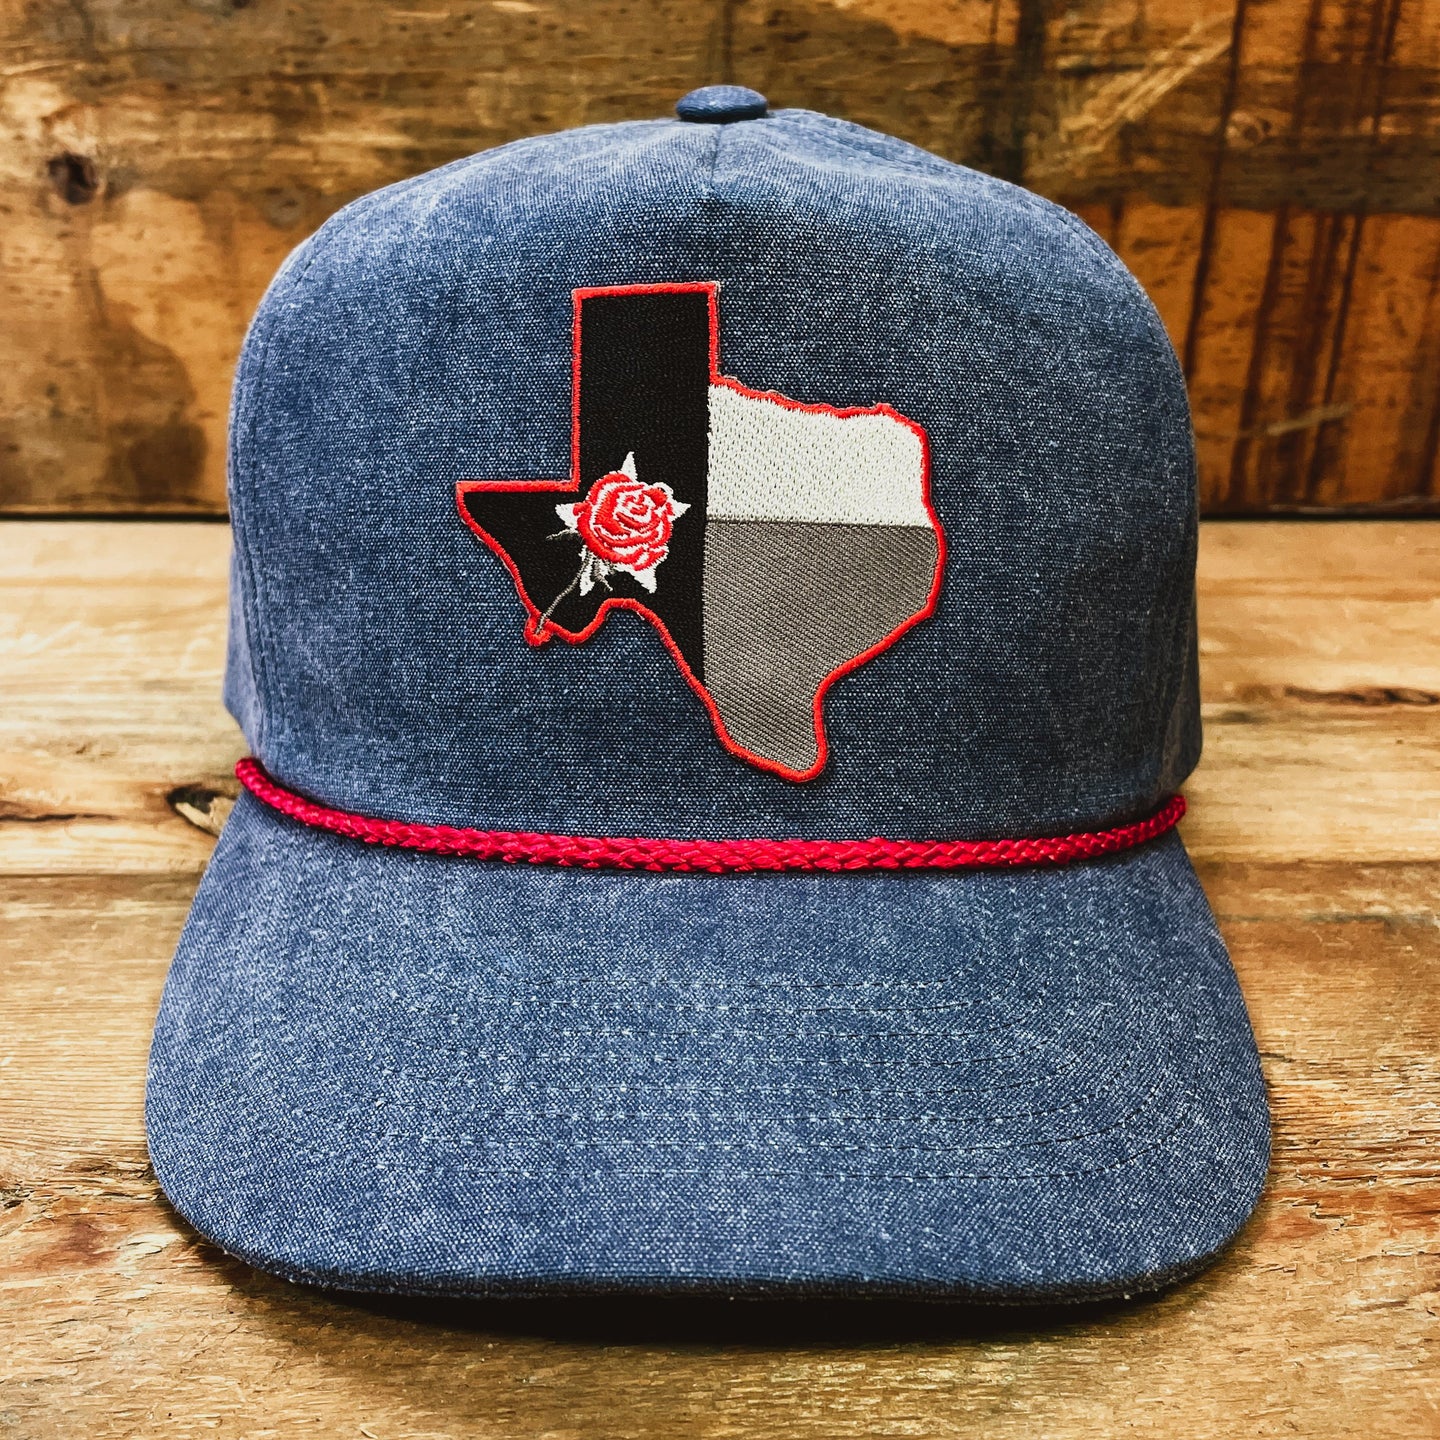 Classic Rope Hat with Texas Red Rose Patch - Hats - BIGGIETX (7199870648476)